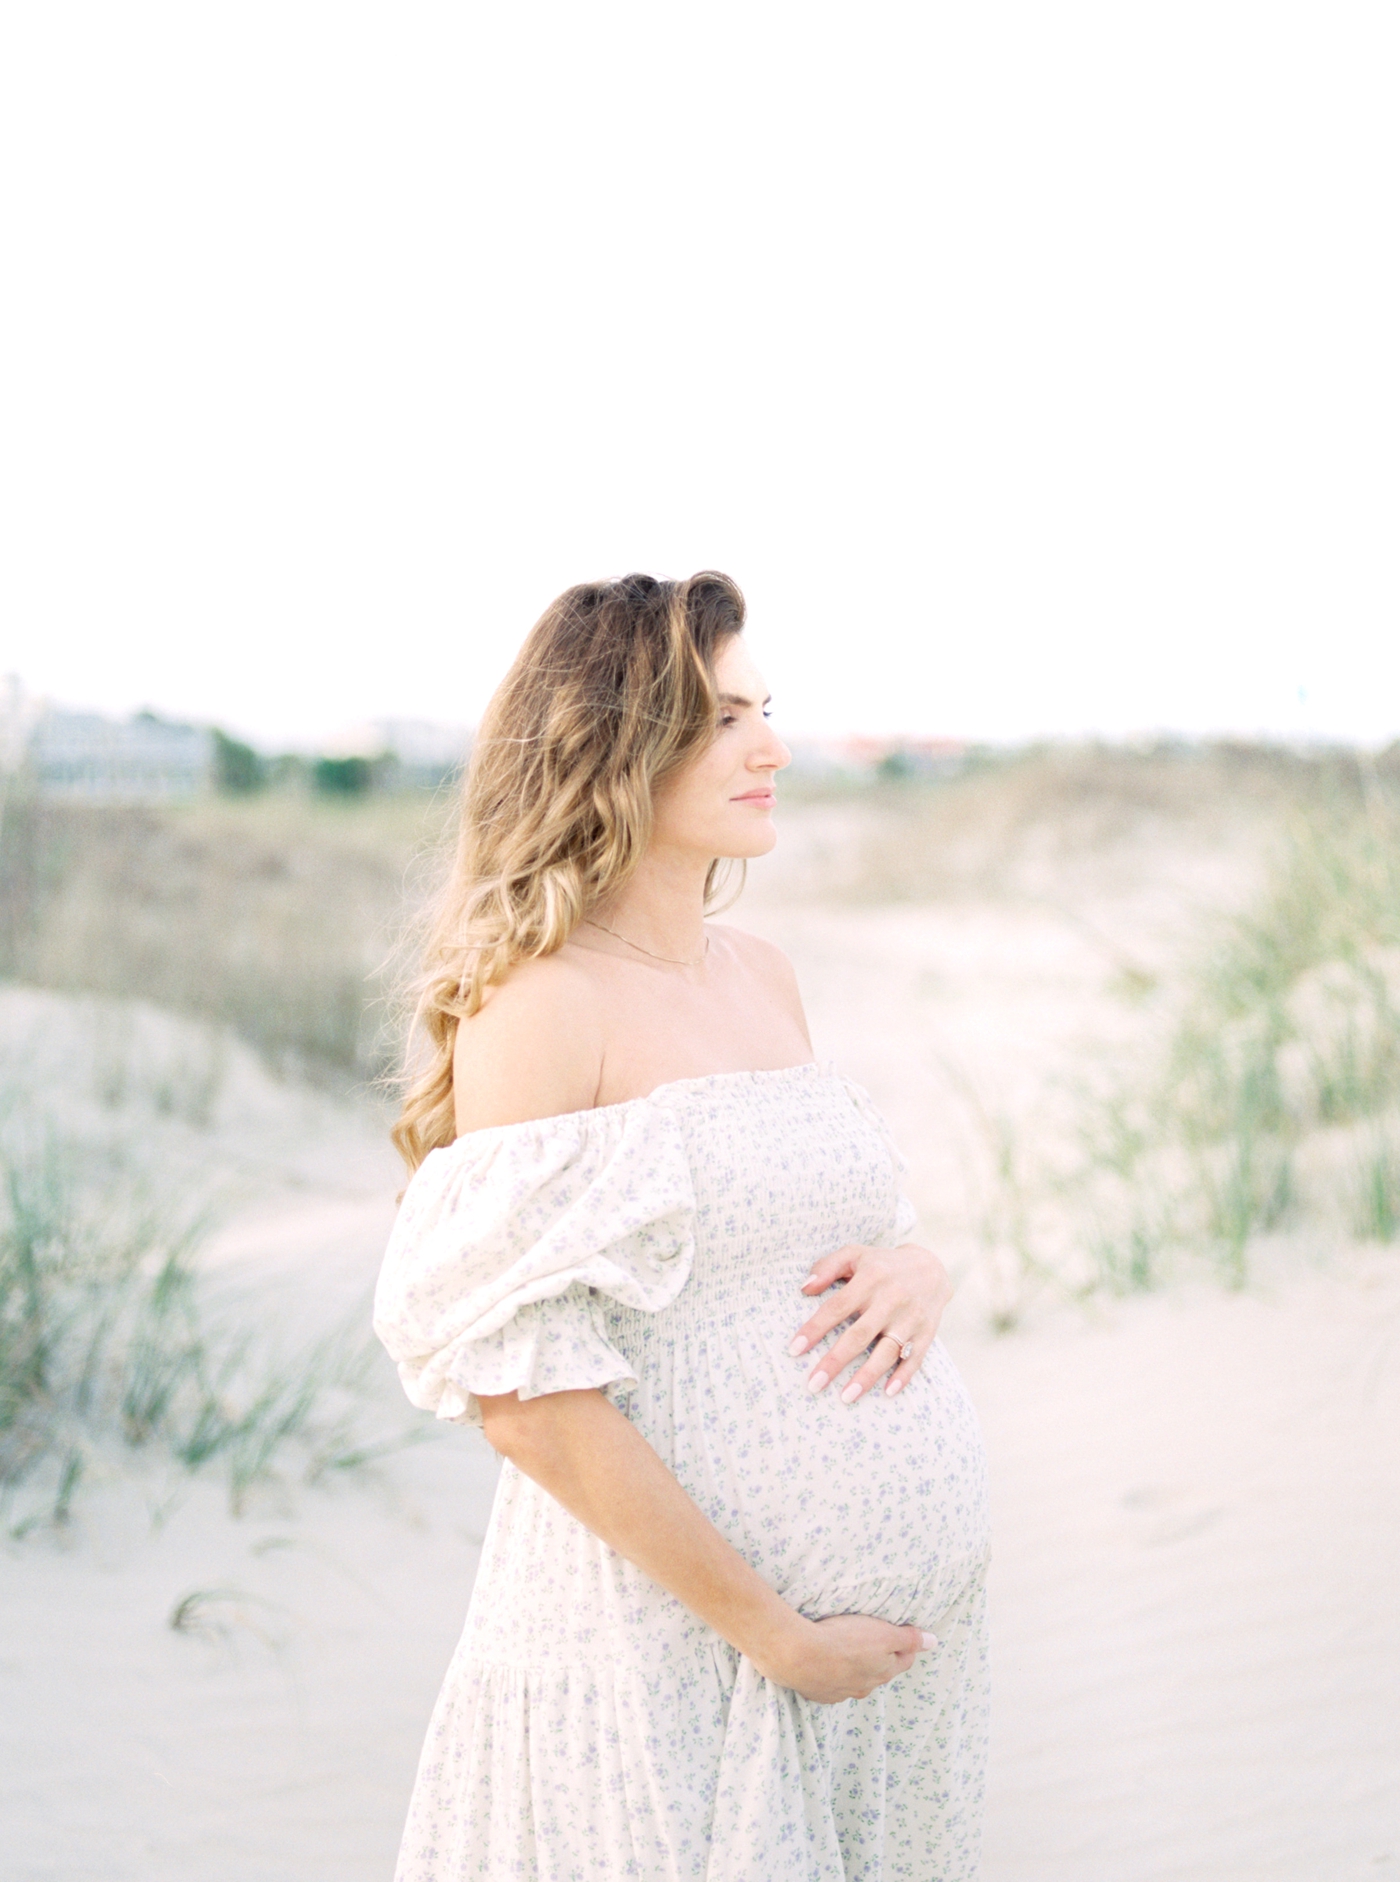 Pregnant woman on the beach | Photo by Caitlyn Motycka Photography.